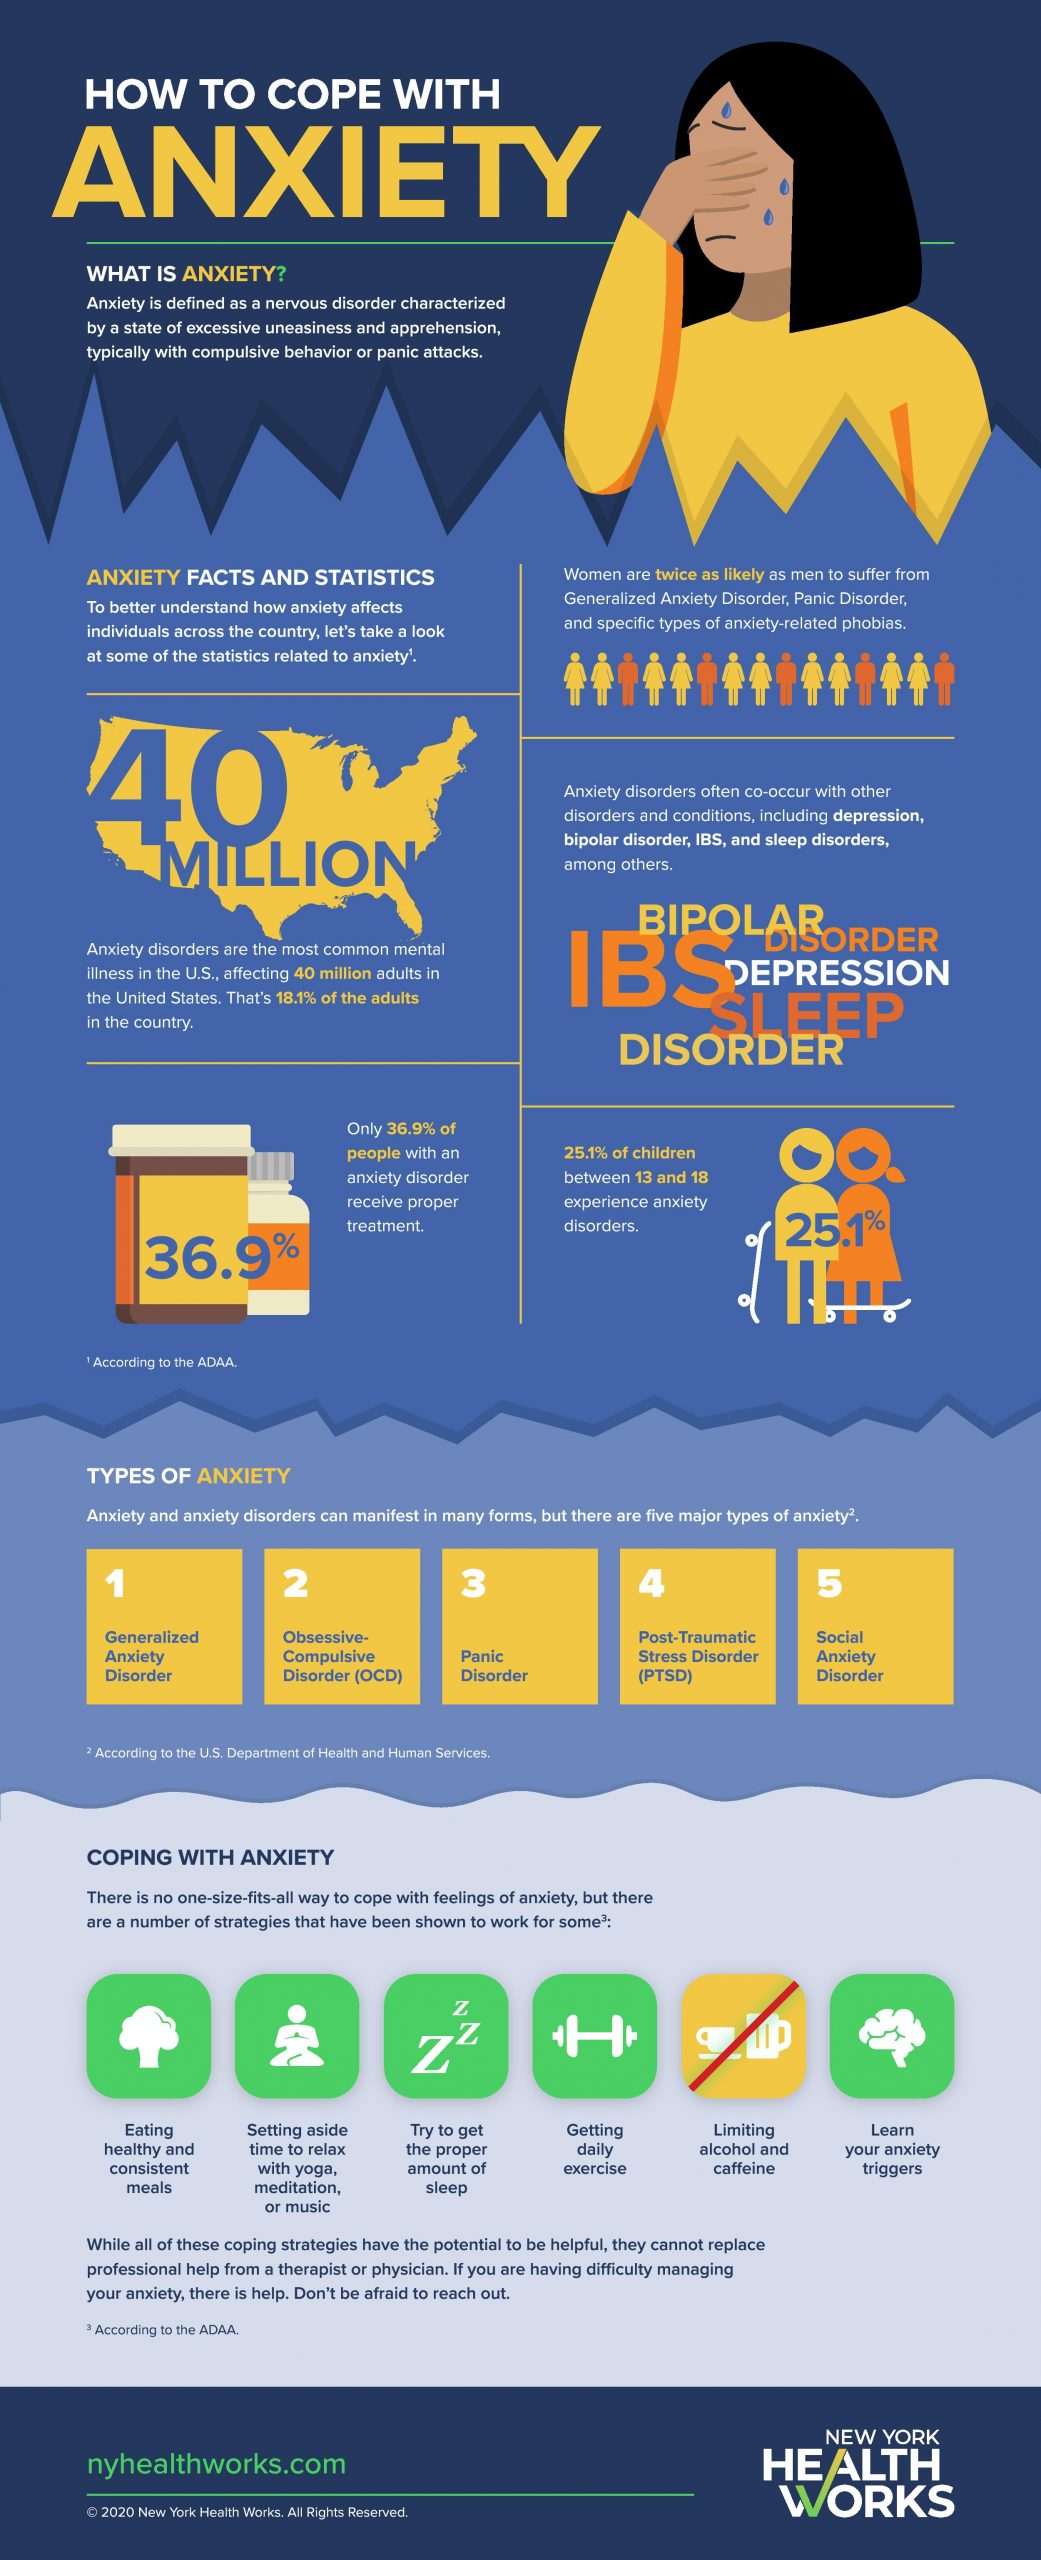 "Coping With Anxiety" infographic 